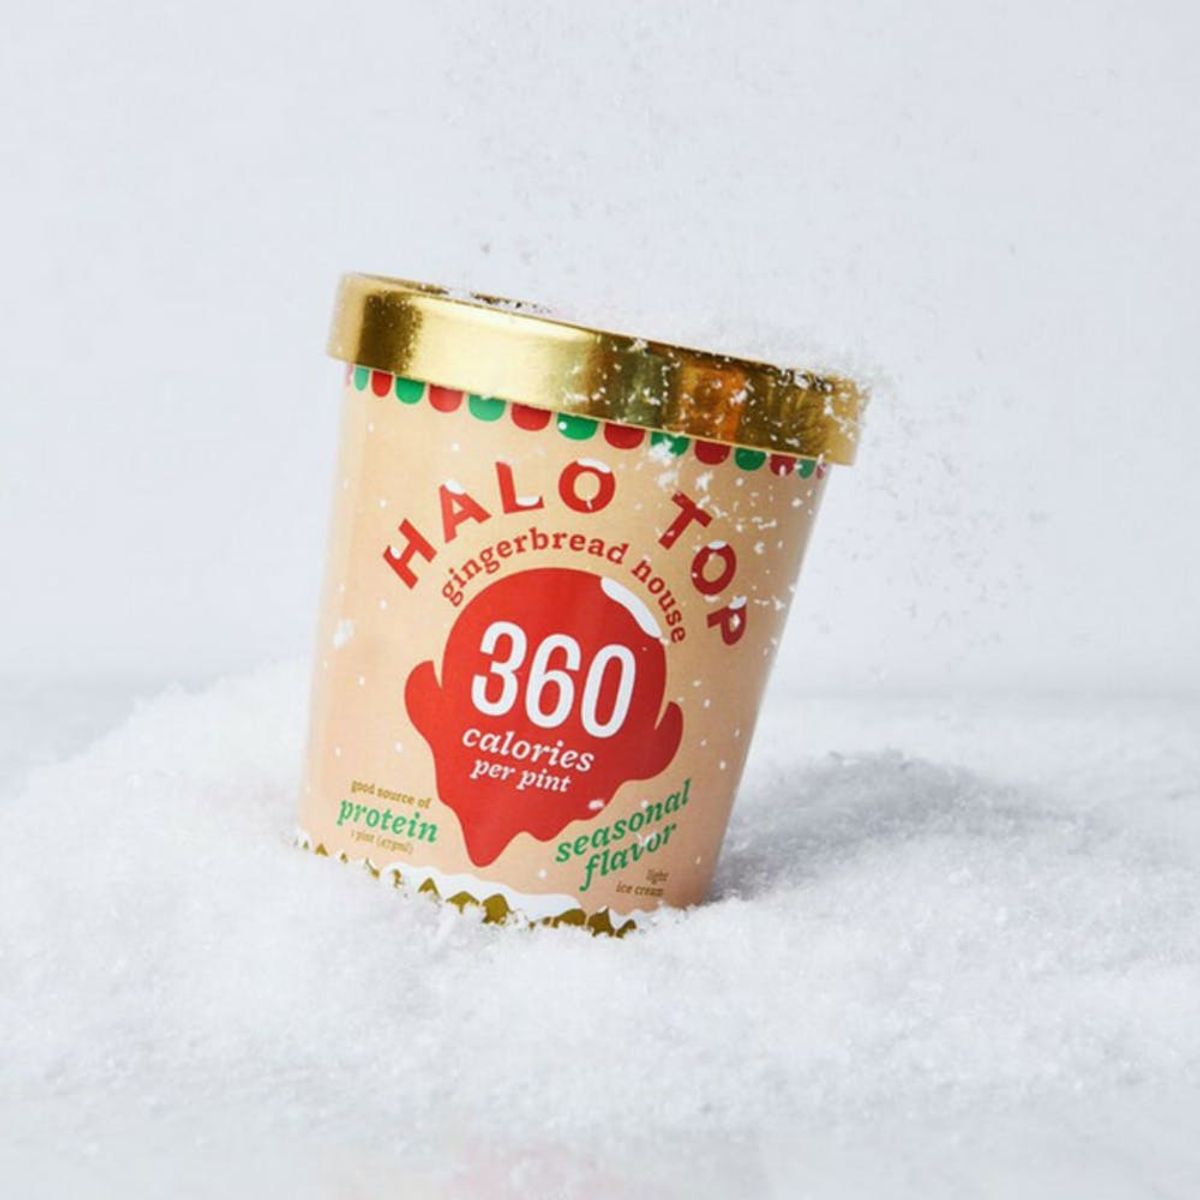 Halo Top Creamery Just Broke the Internet With Its Latest Releases